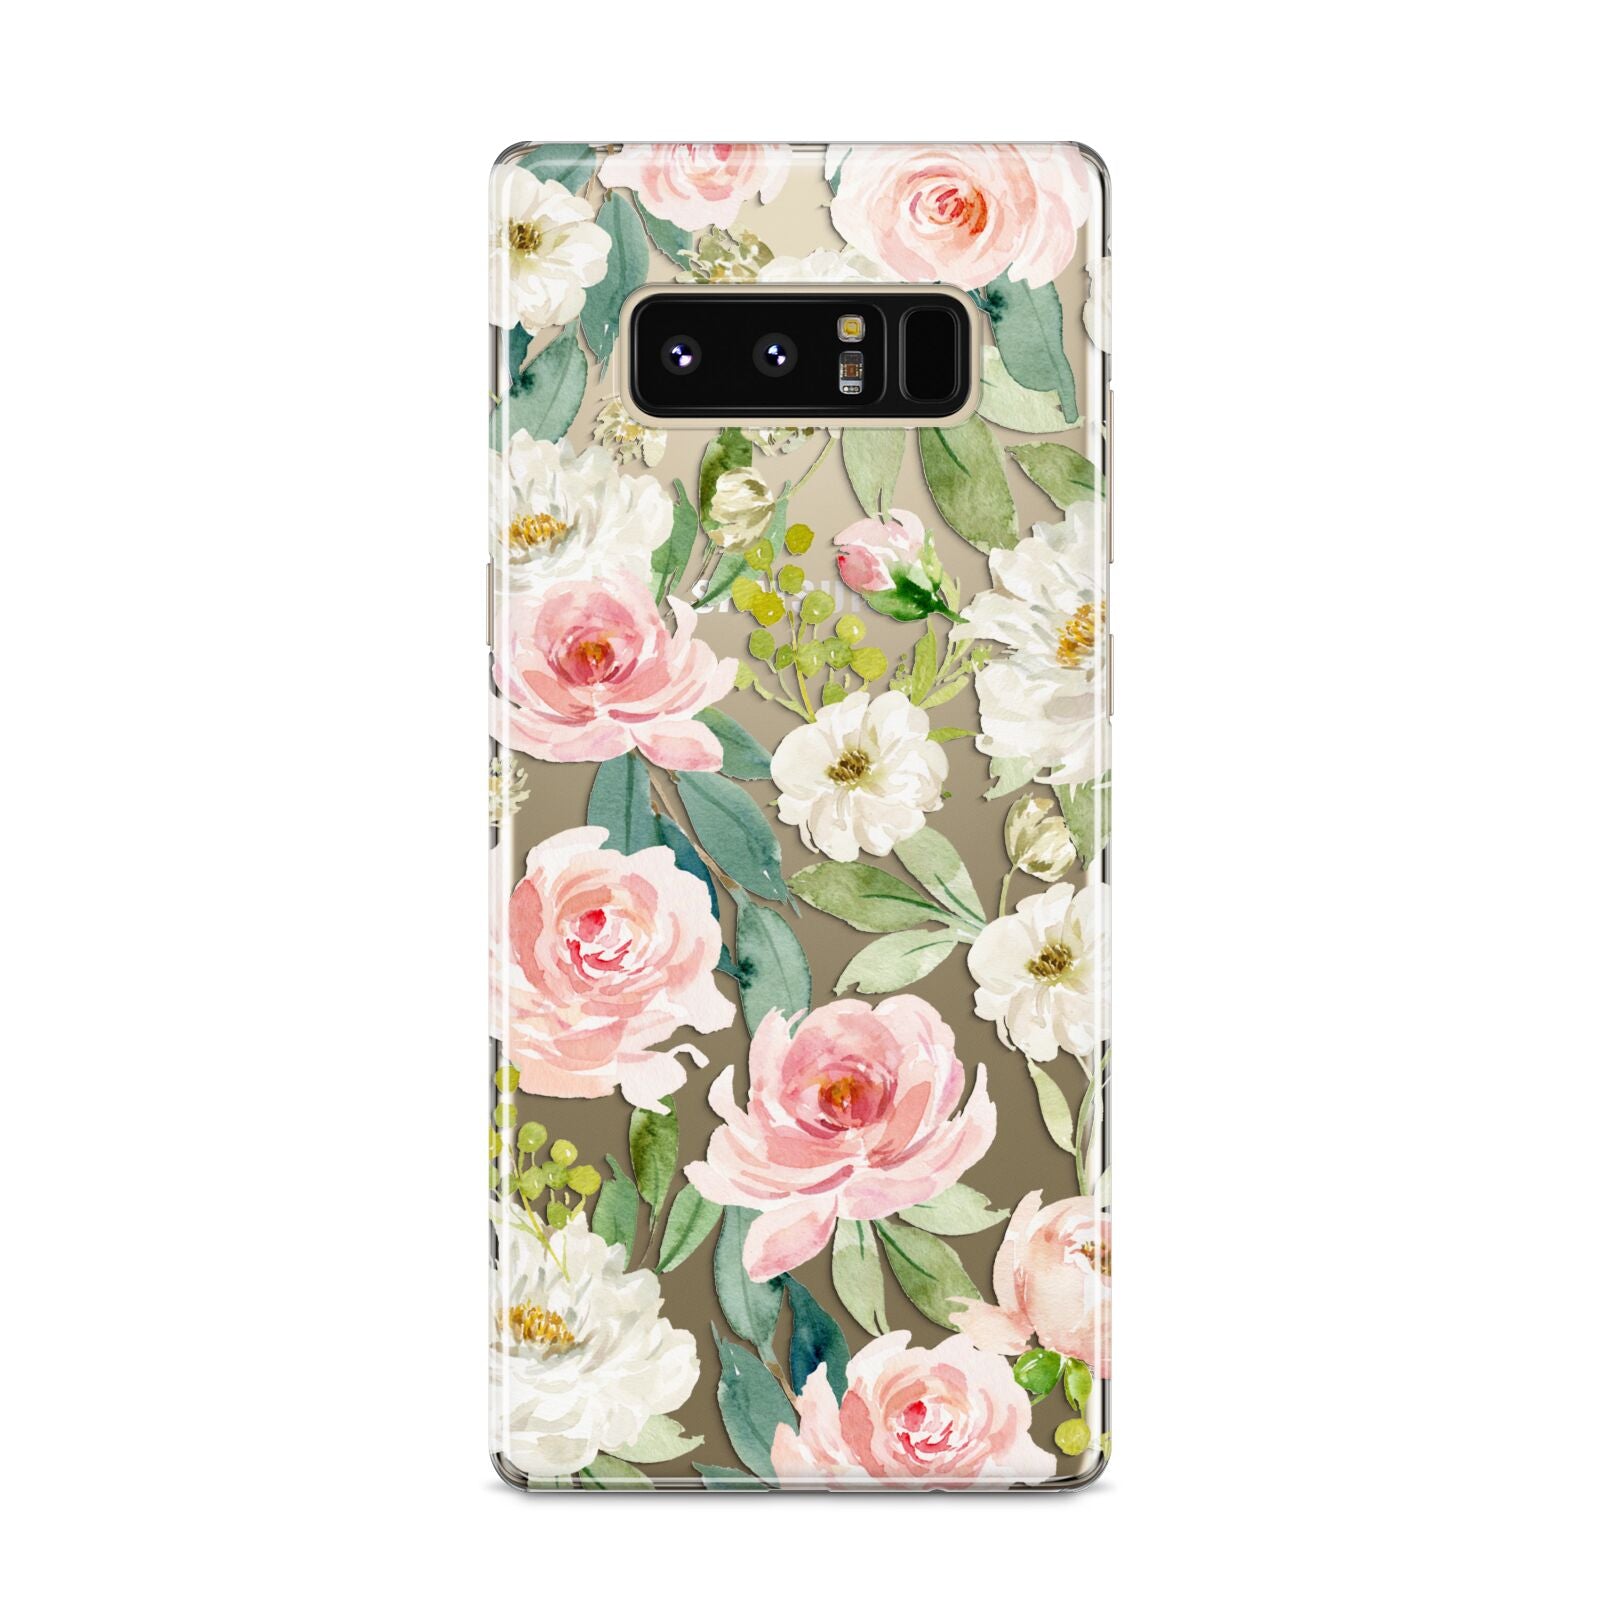 Watercolour Peonies Roses and Foliage Samsung Galaxy S8 Case